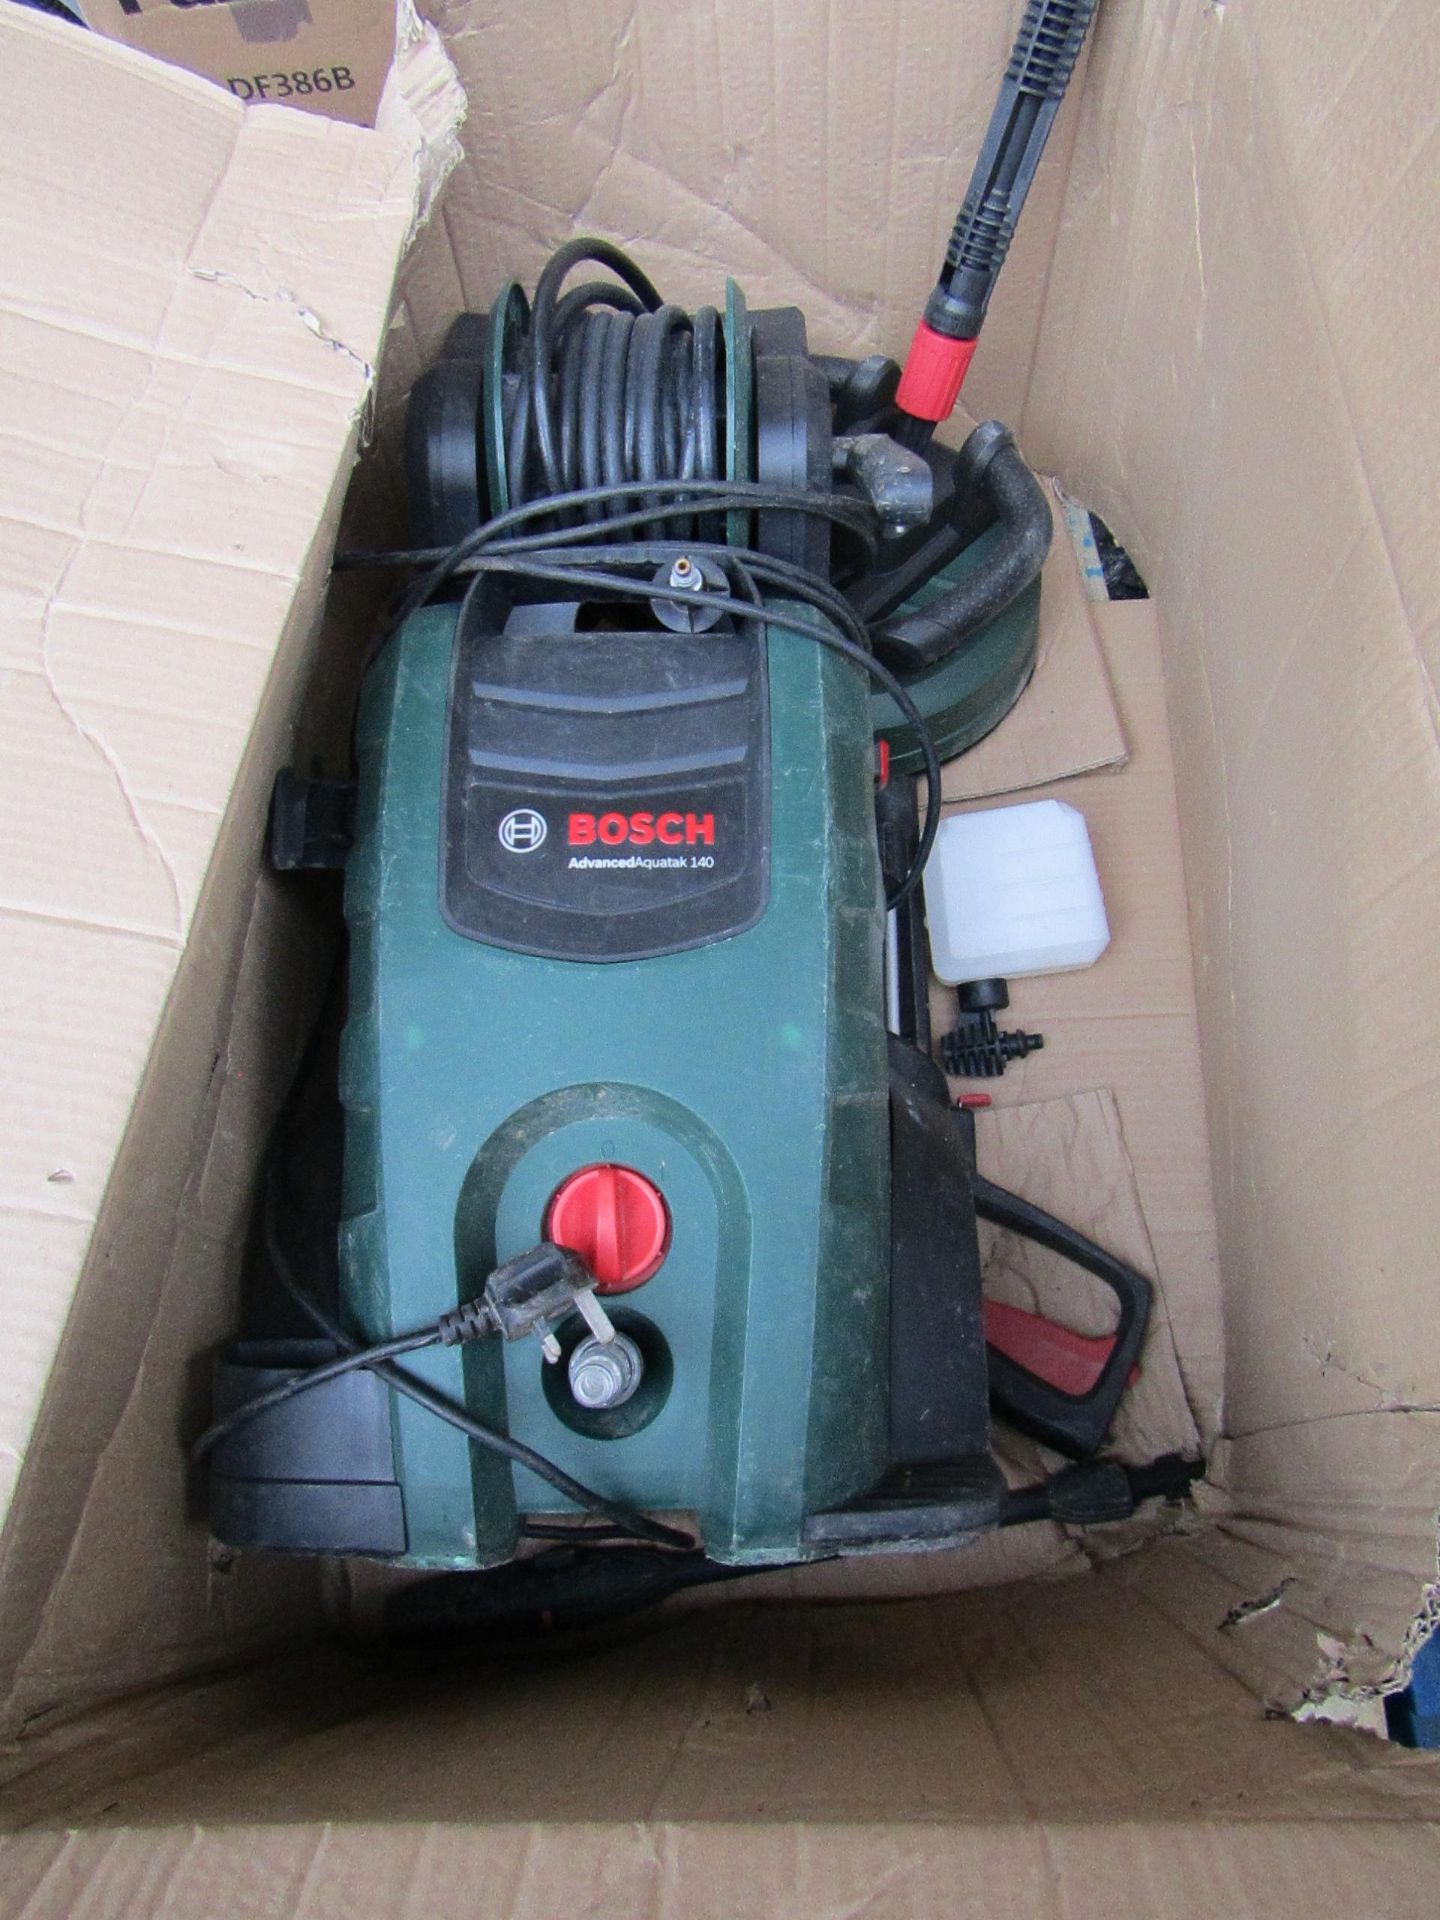 Bosch Advanced Aquatak 140 pressure washer, powers on but not tested it's full functions. RRP £299.